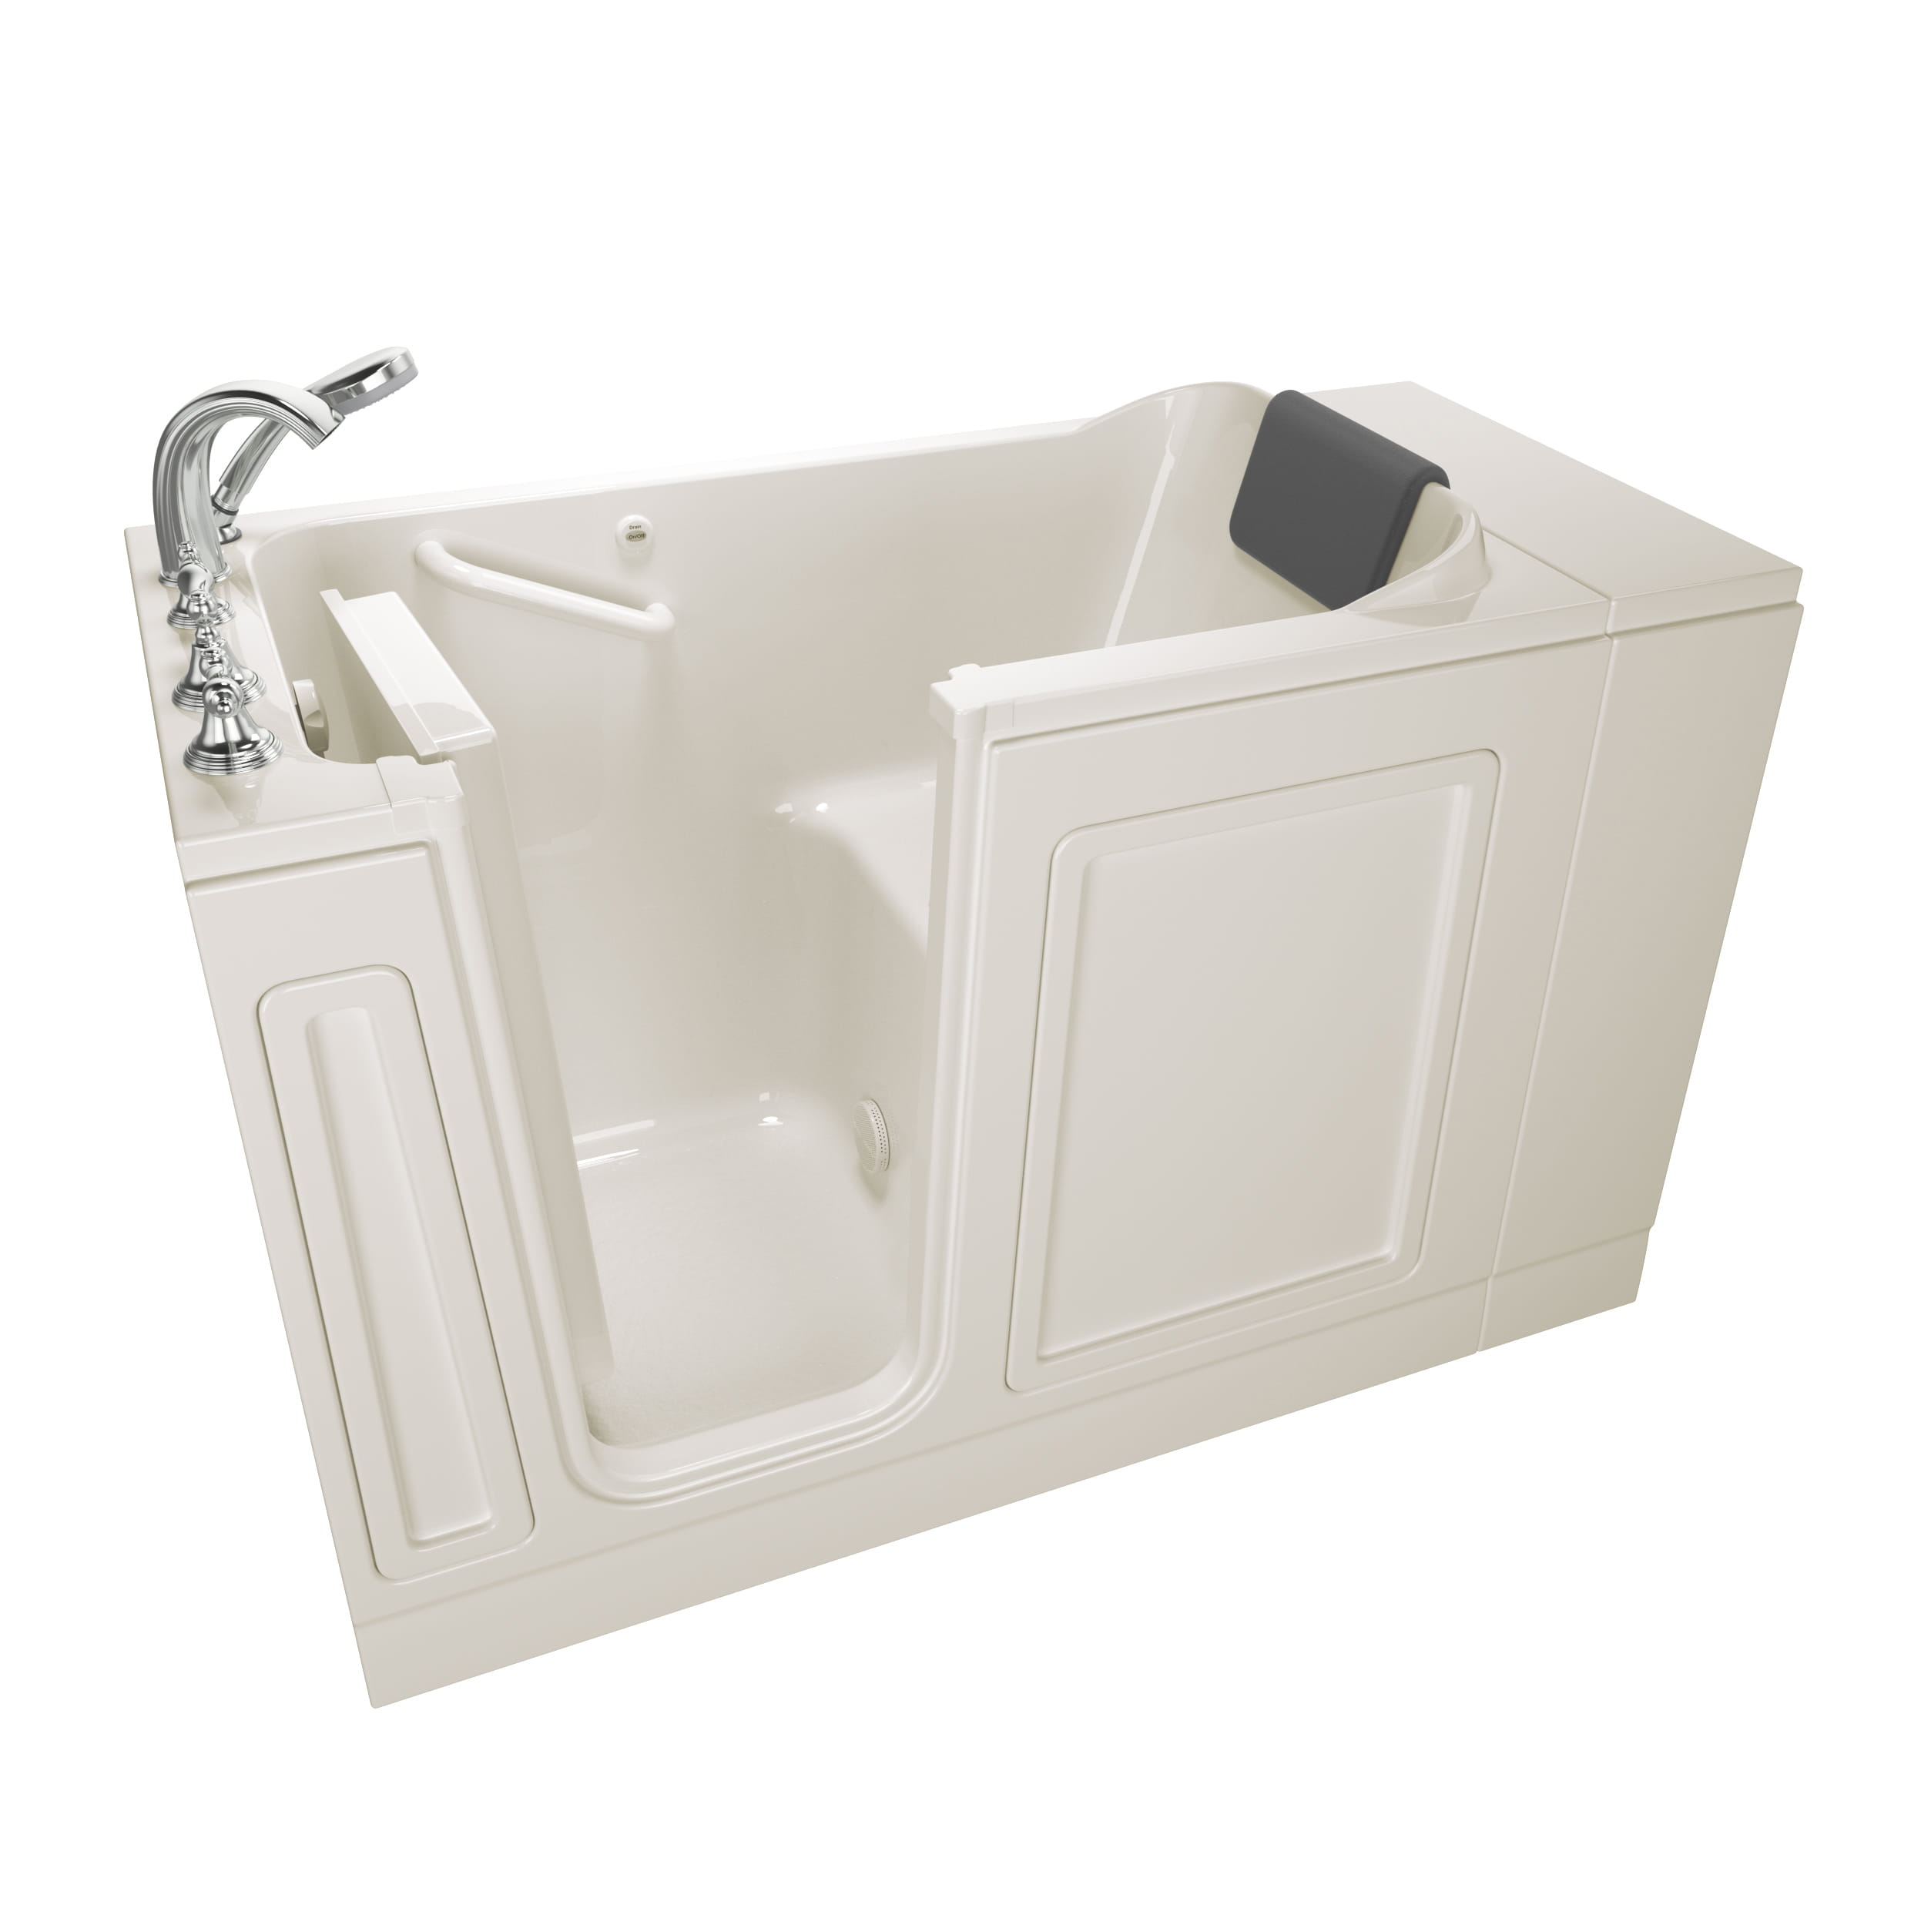 Acrylic Luxury Series 28 x 48-Inch Walk-in Tub With Soaker System - Left-Hand Drain With Faucet